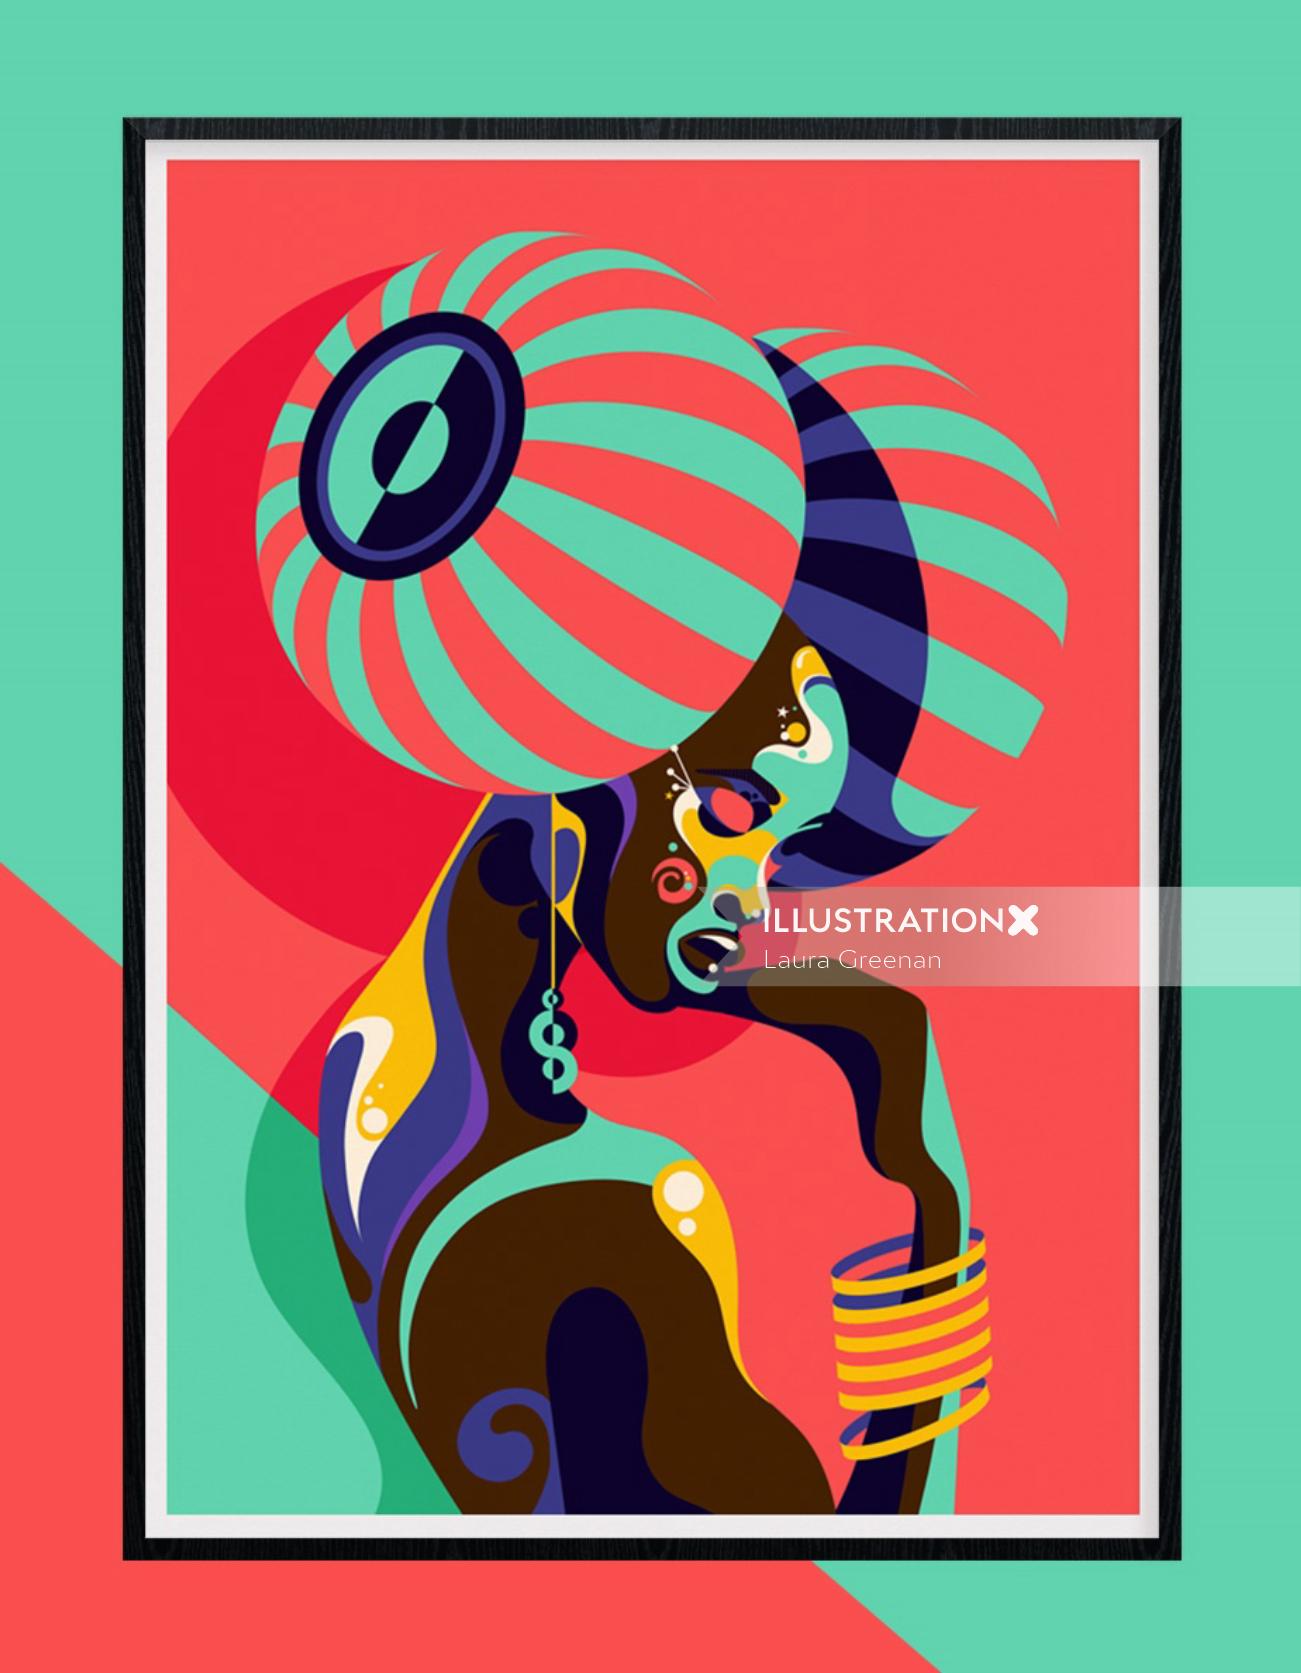 A colourful and fun pop art style portrait of a dark skinned woman.